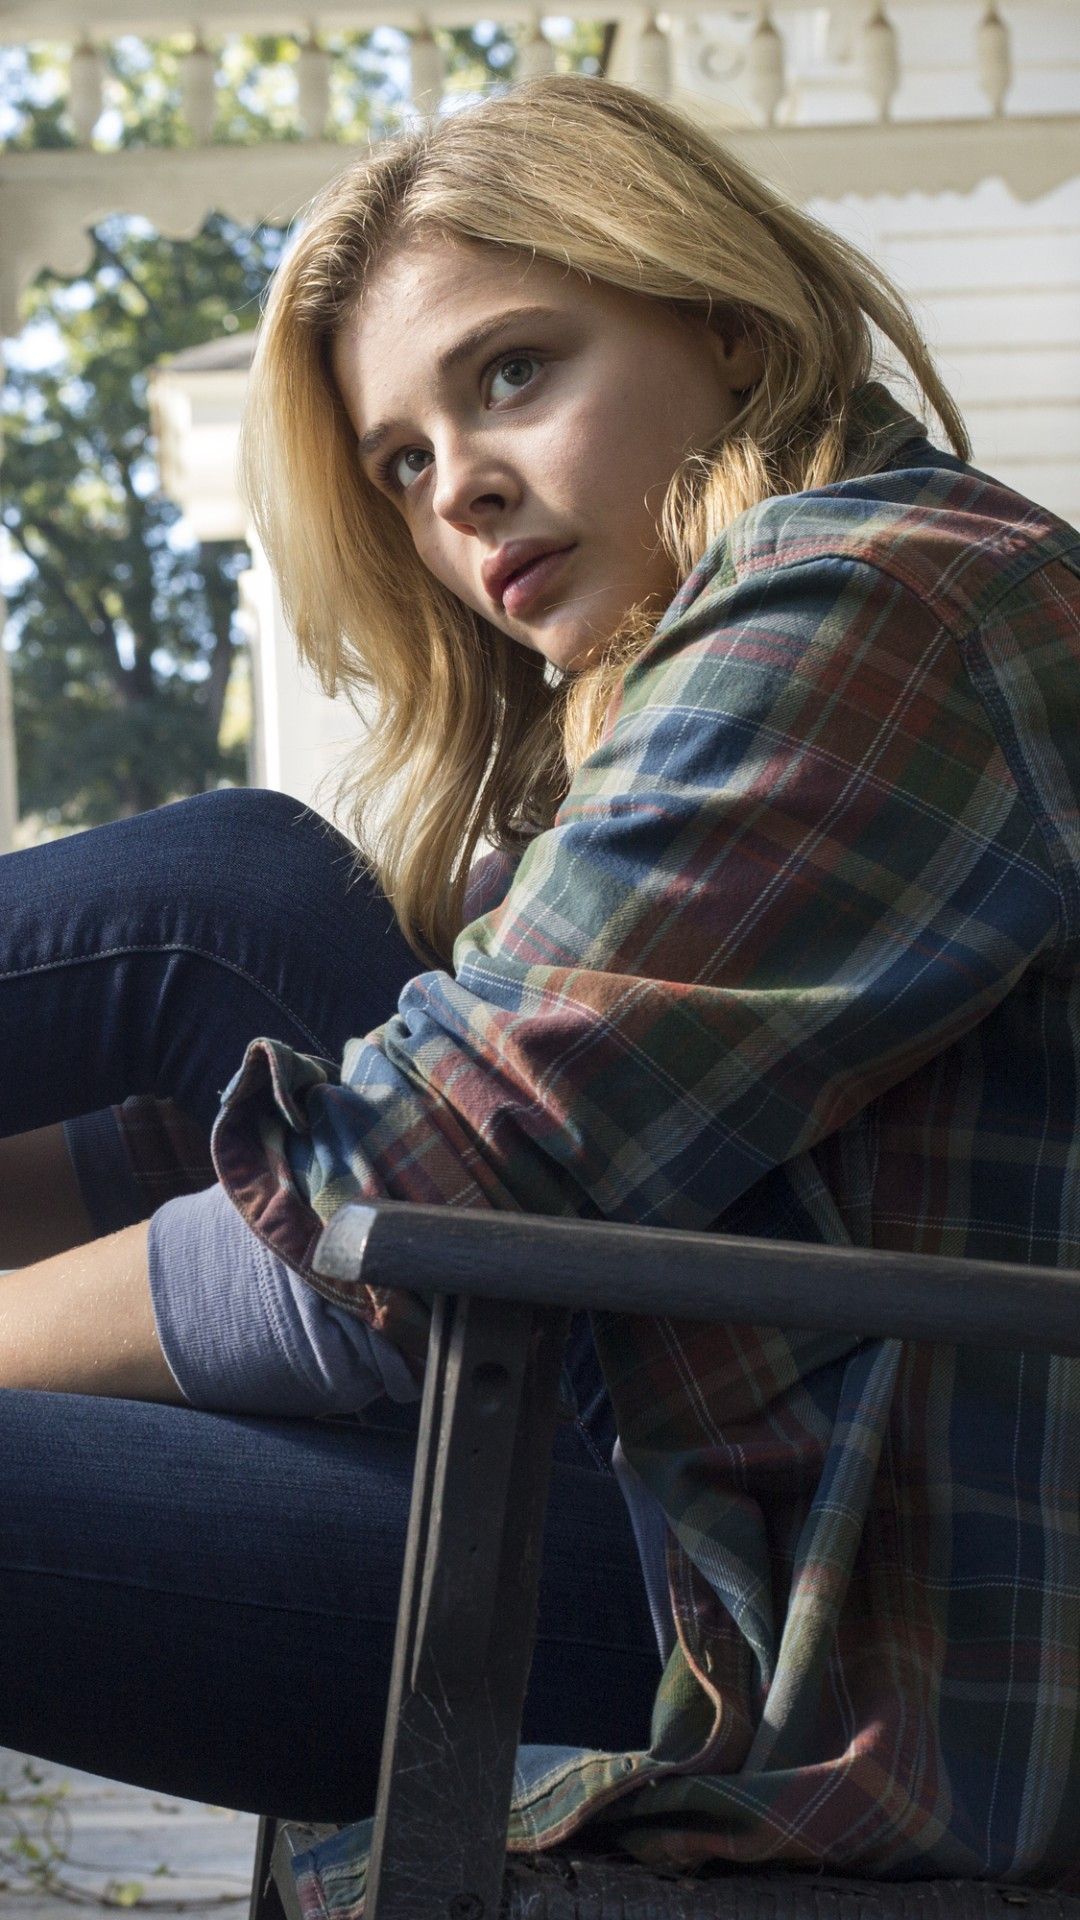 Wallpaper The 5th wave, Best movies, Chloe Moretz, Movies